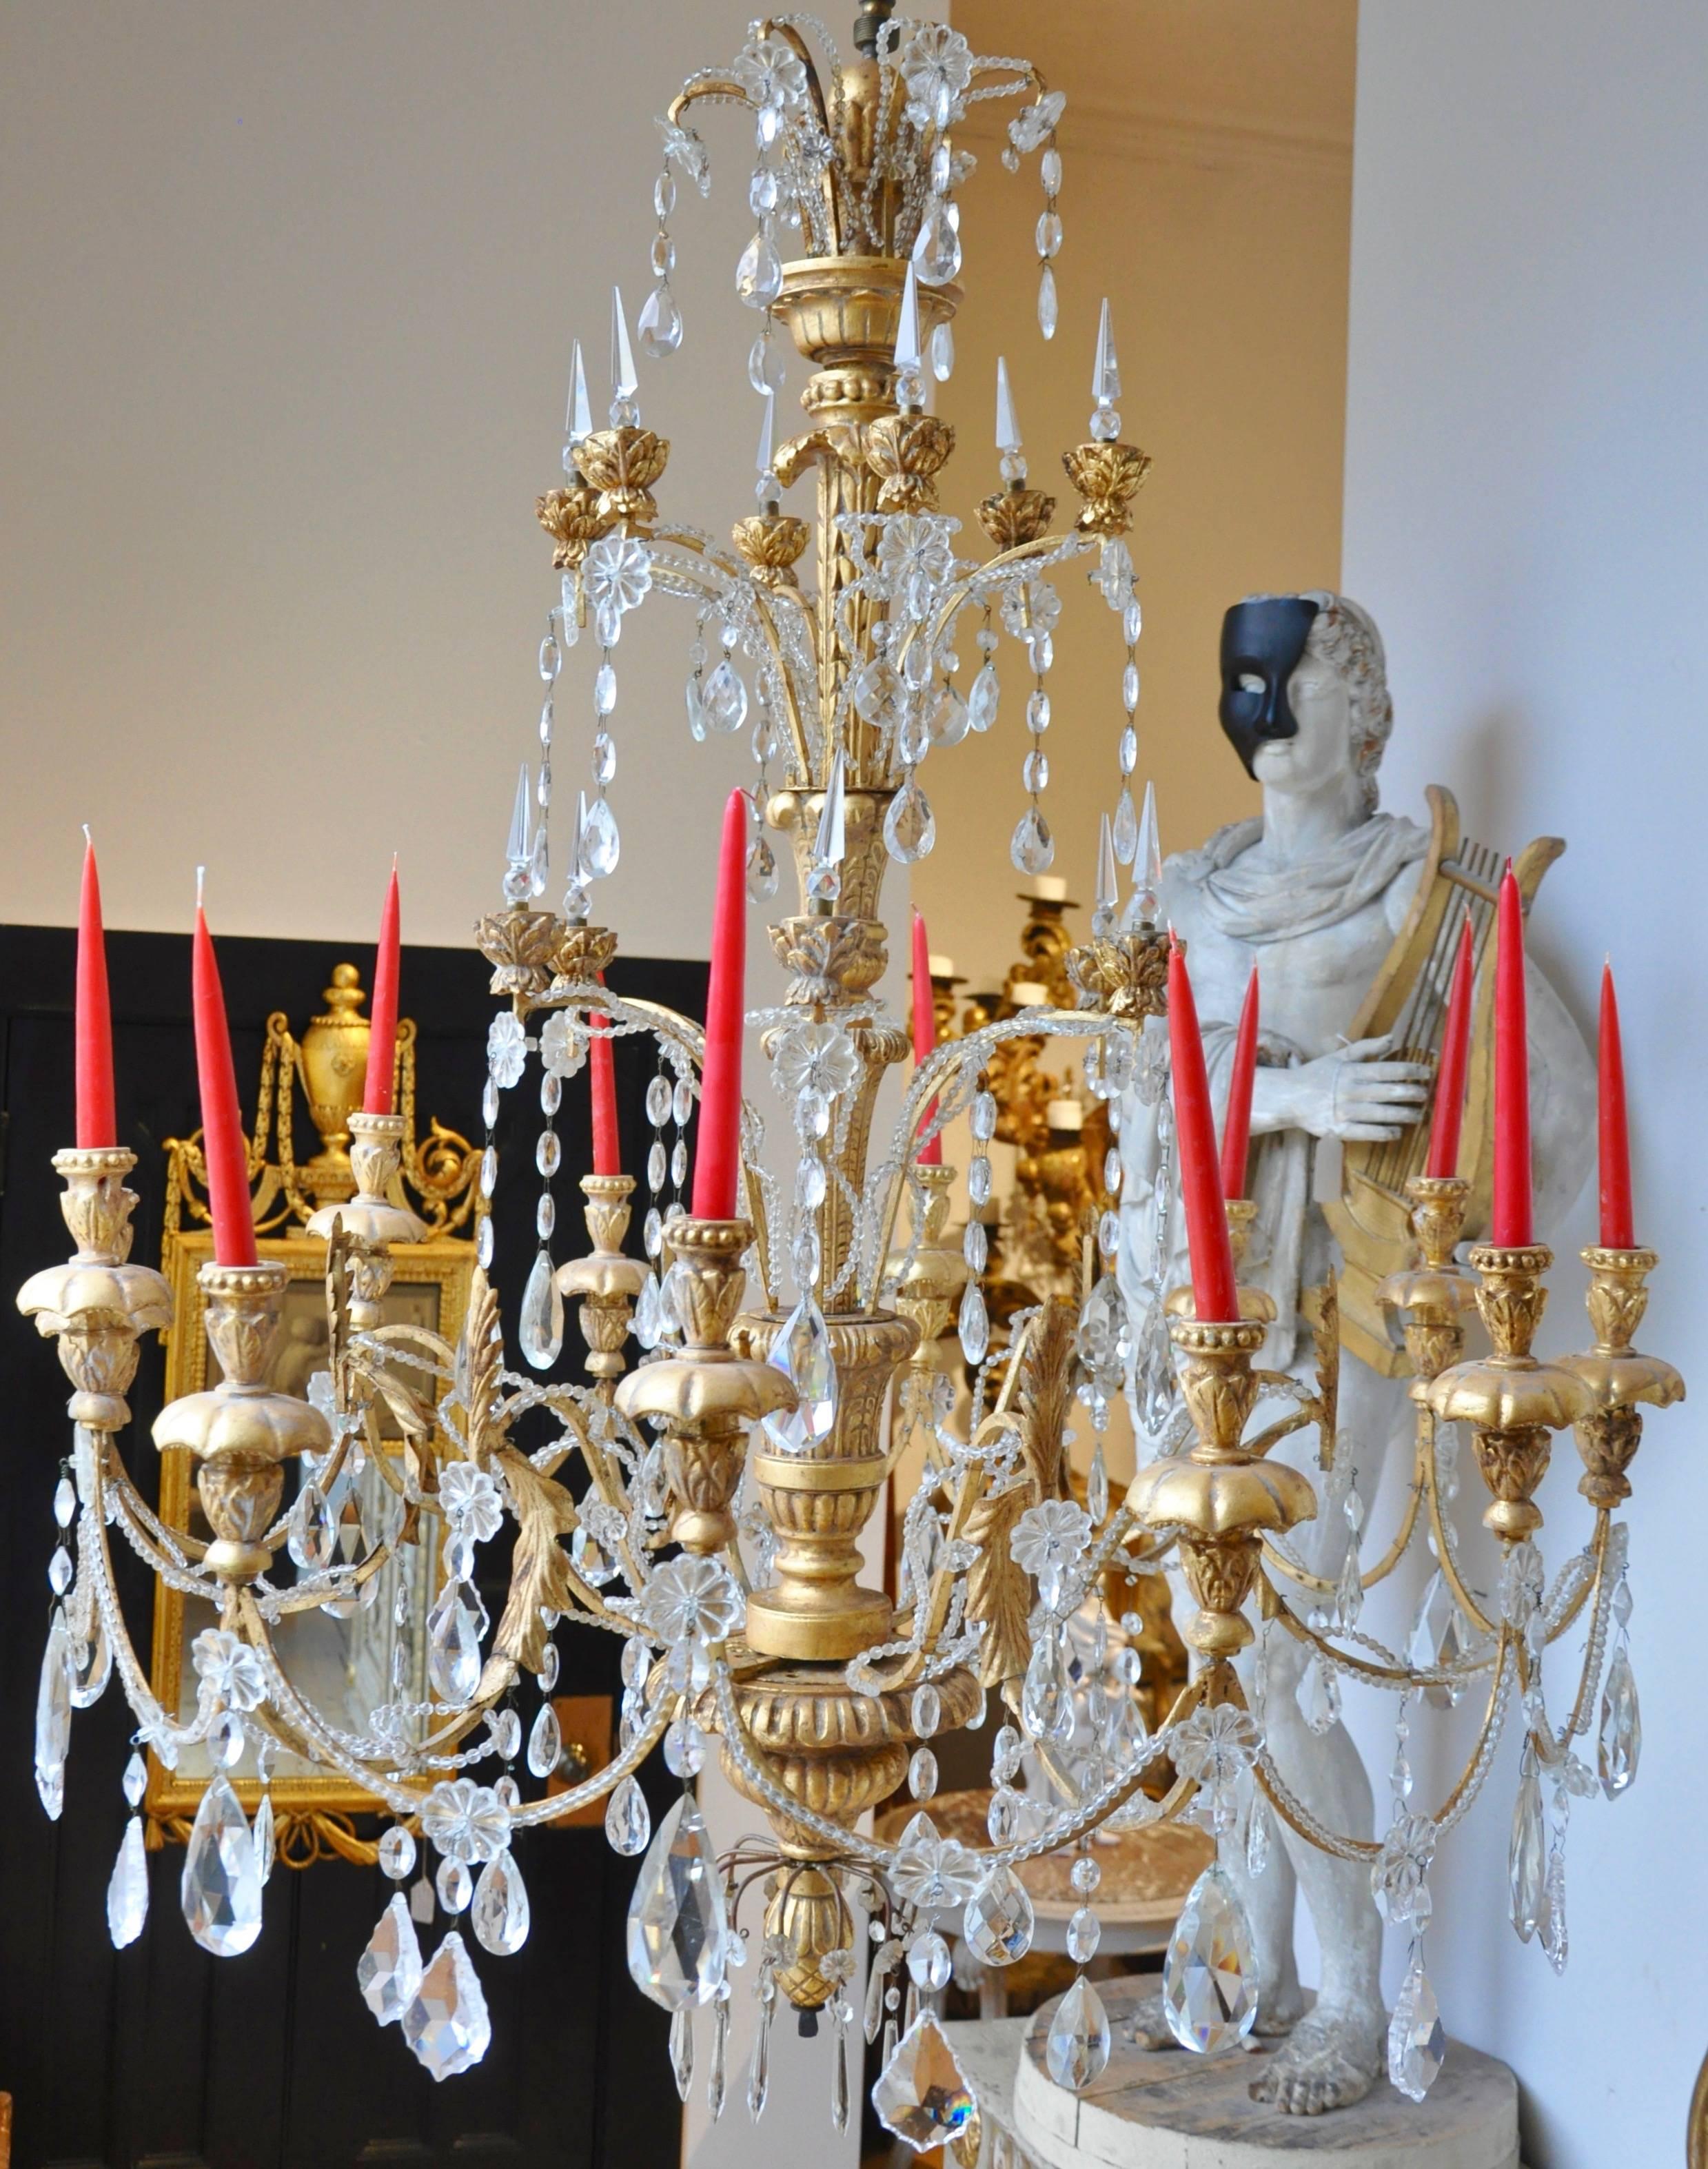 19th century Italian neoclassical giltwood and crystal chandelier

Urn form body issuing 12 arms
original crystals
Neoclassical 
Can be French wired at customer's request.